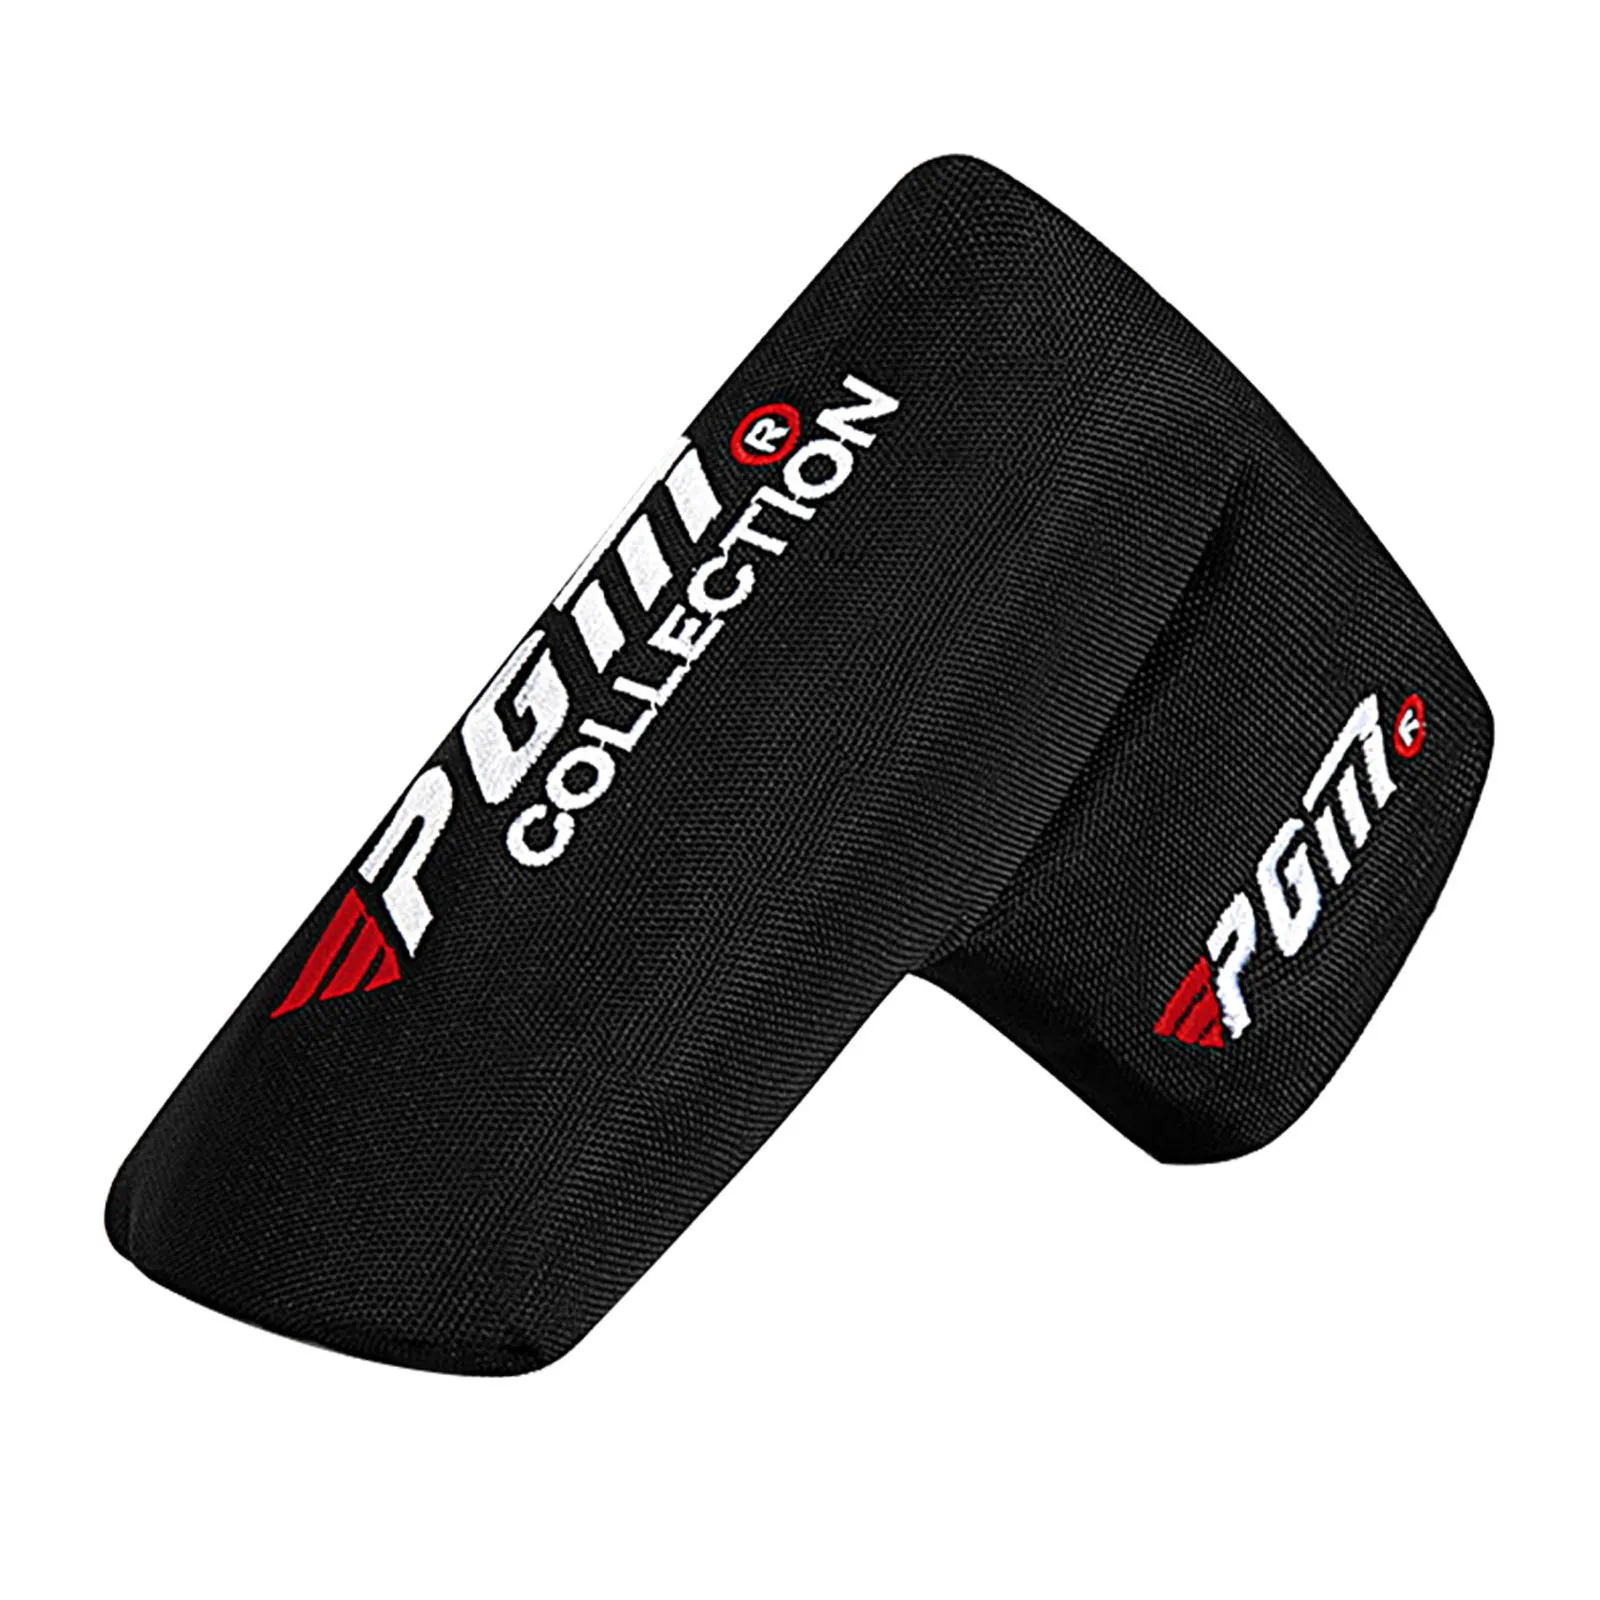 Other Golf Products Universal Full Protection Golf Putter Head Cover Lightweight Soft Nylon Fabric Home Dust Resistant Sports Accessories Club 230703